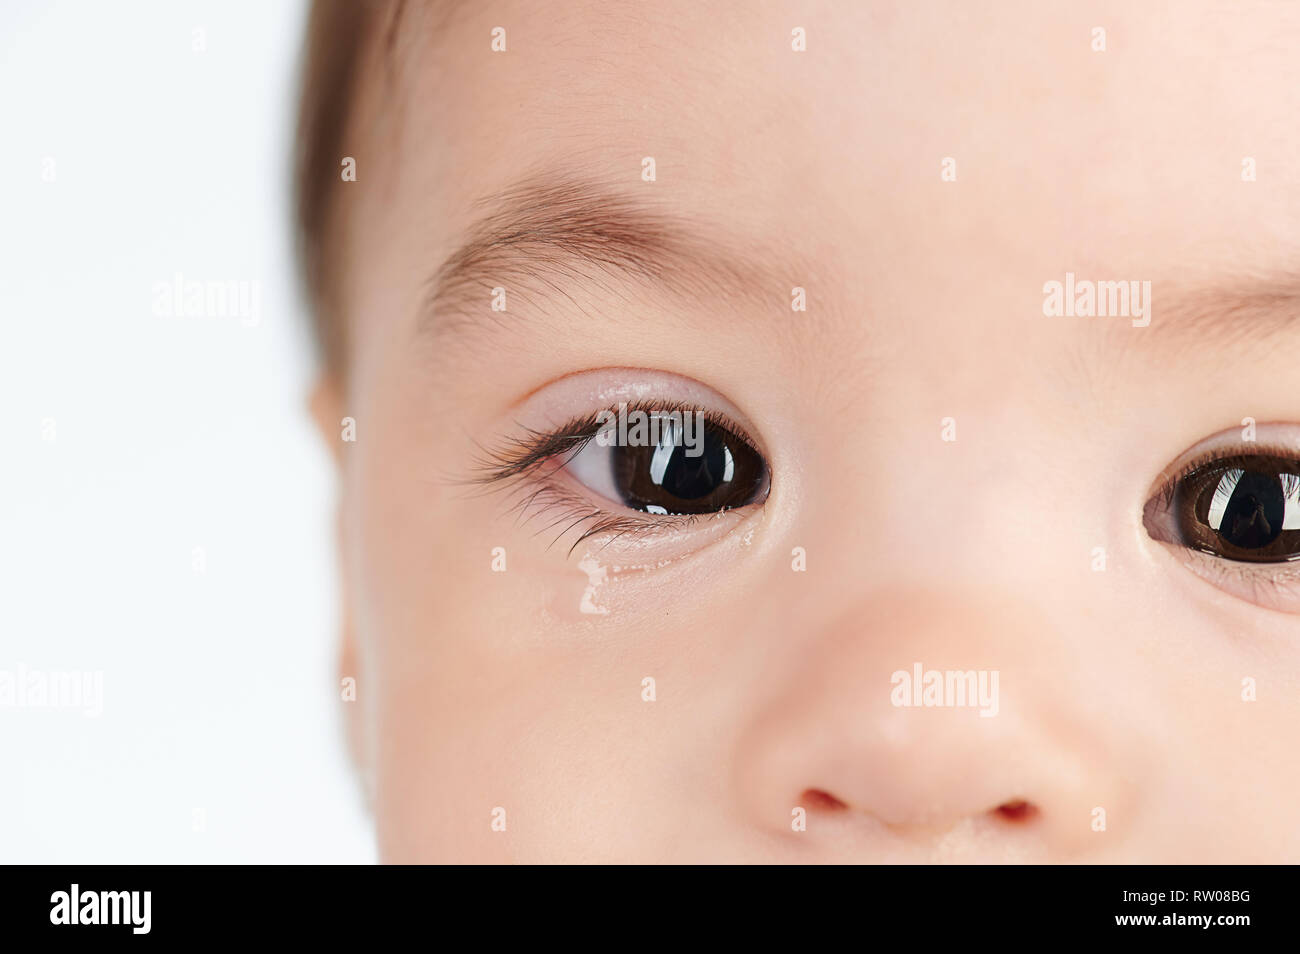 Allergy on baby eye with tear close up view Stock Photo